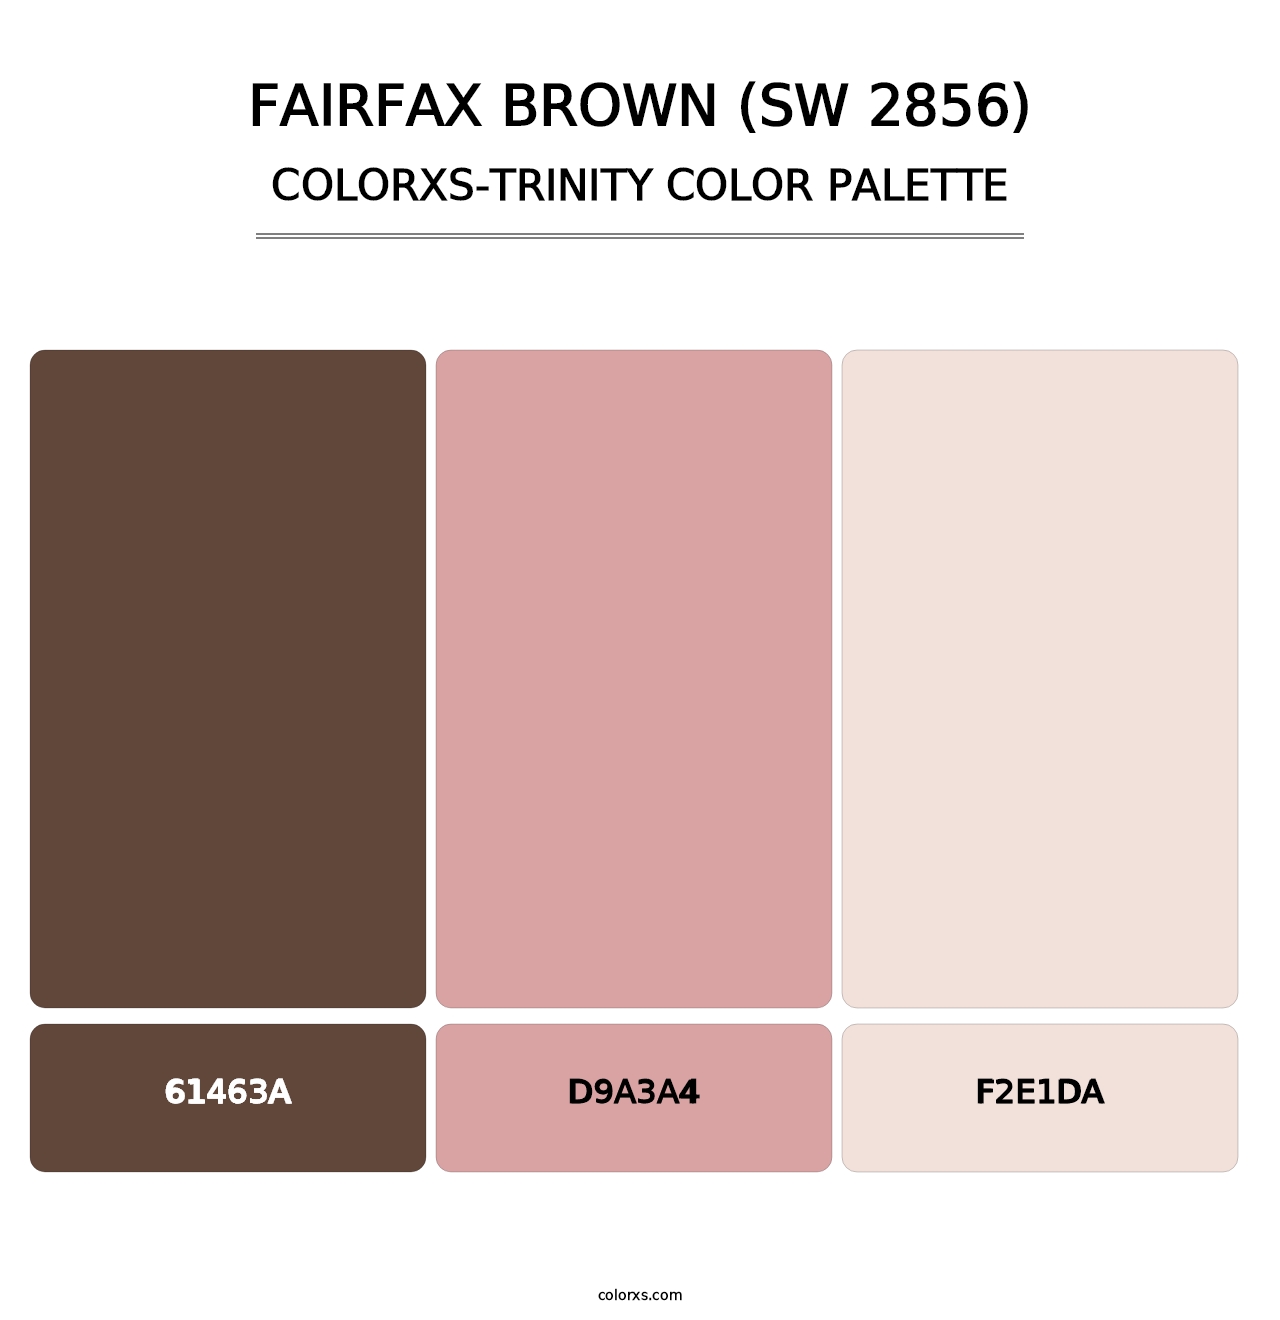 Fairfax Brown (SW 2856) - Colorxs Trinity Palette